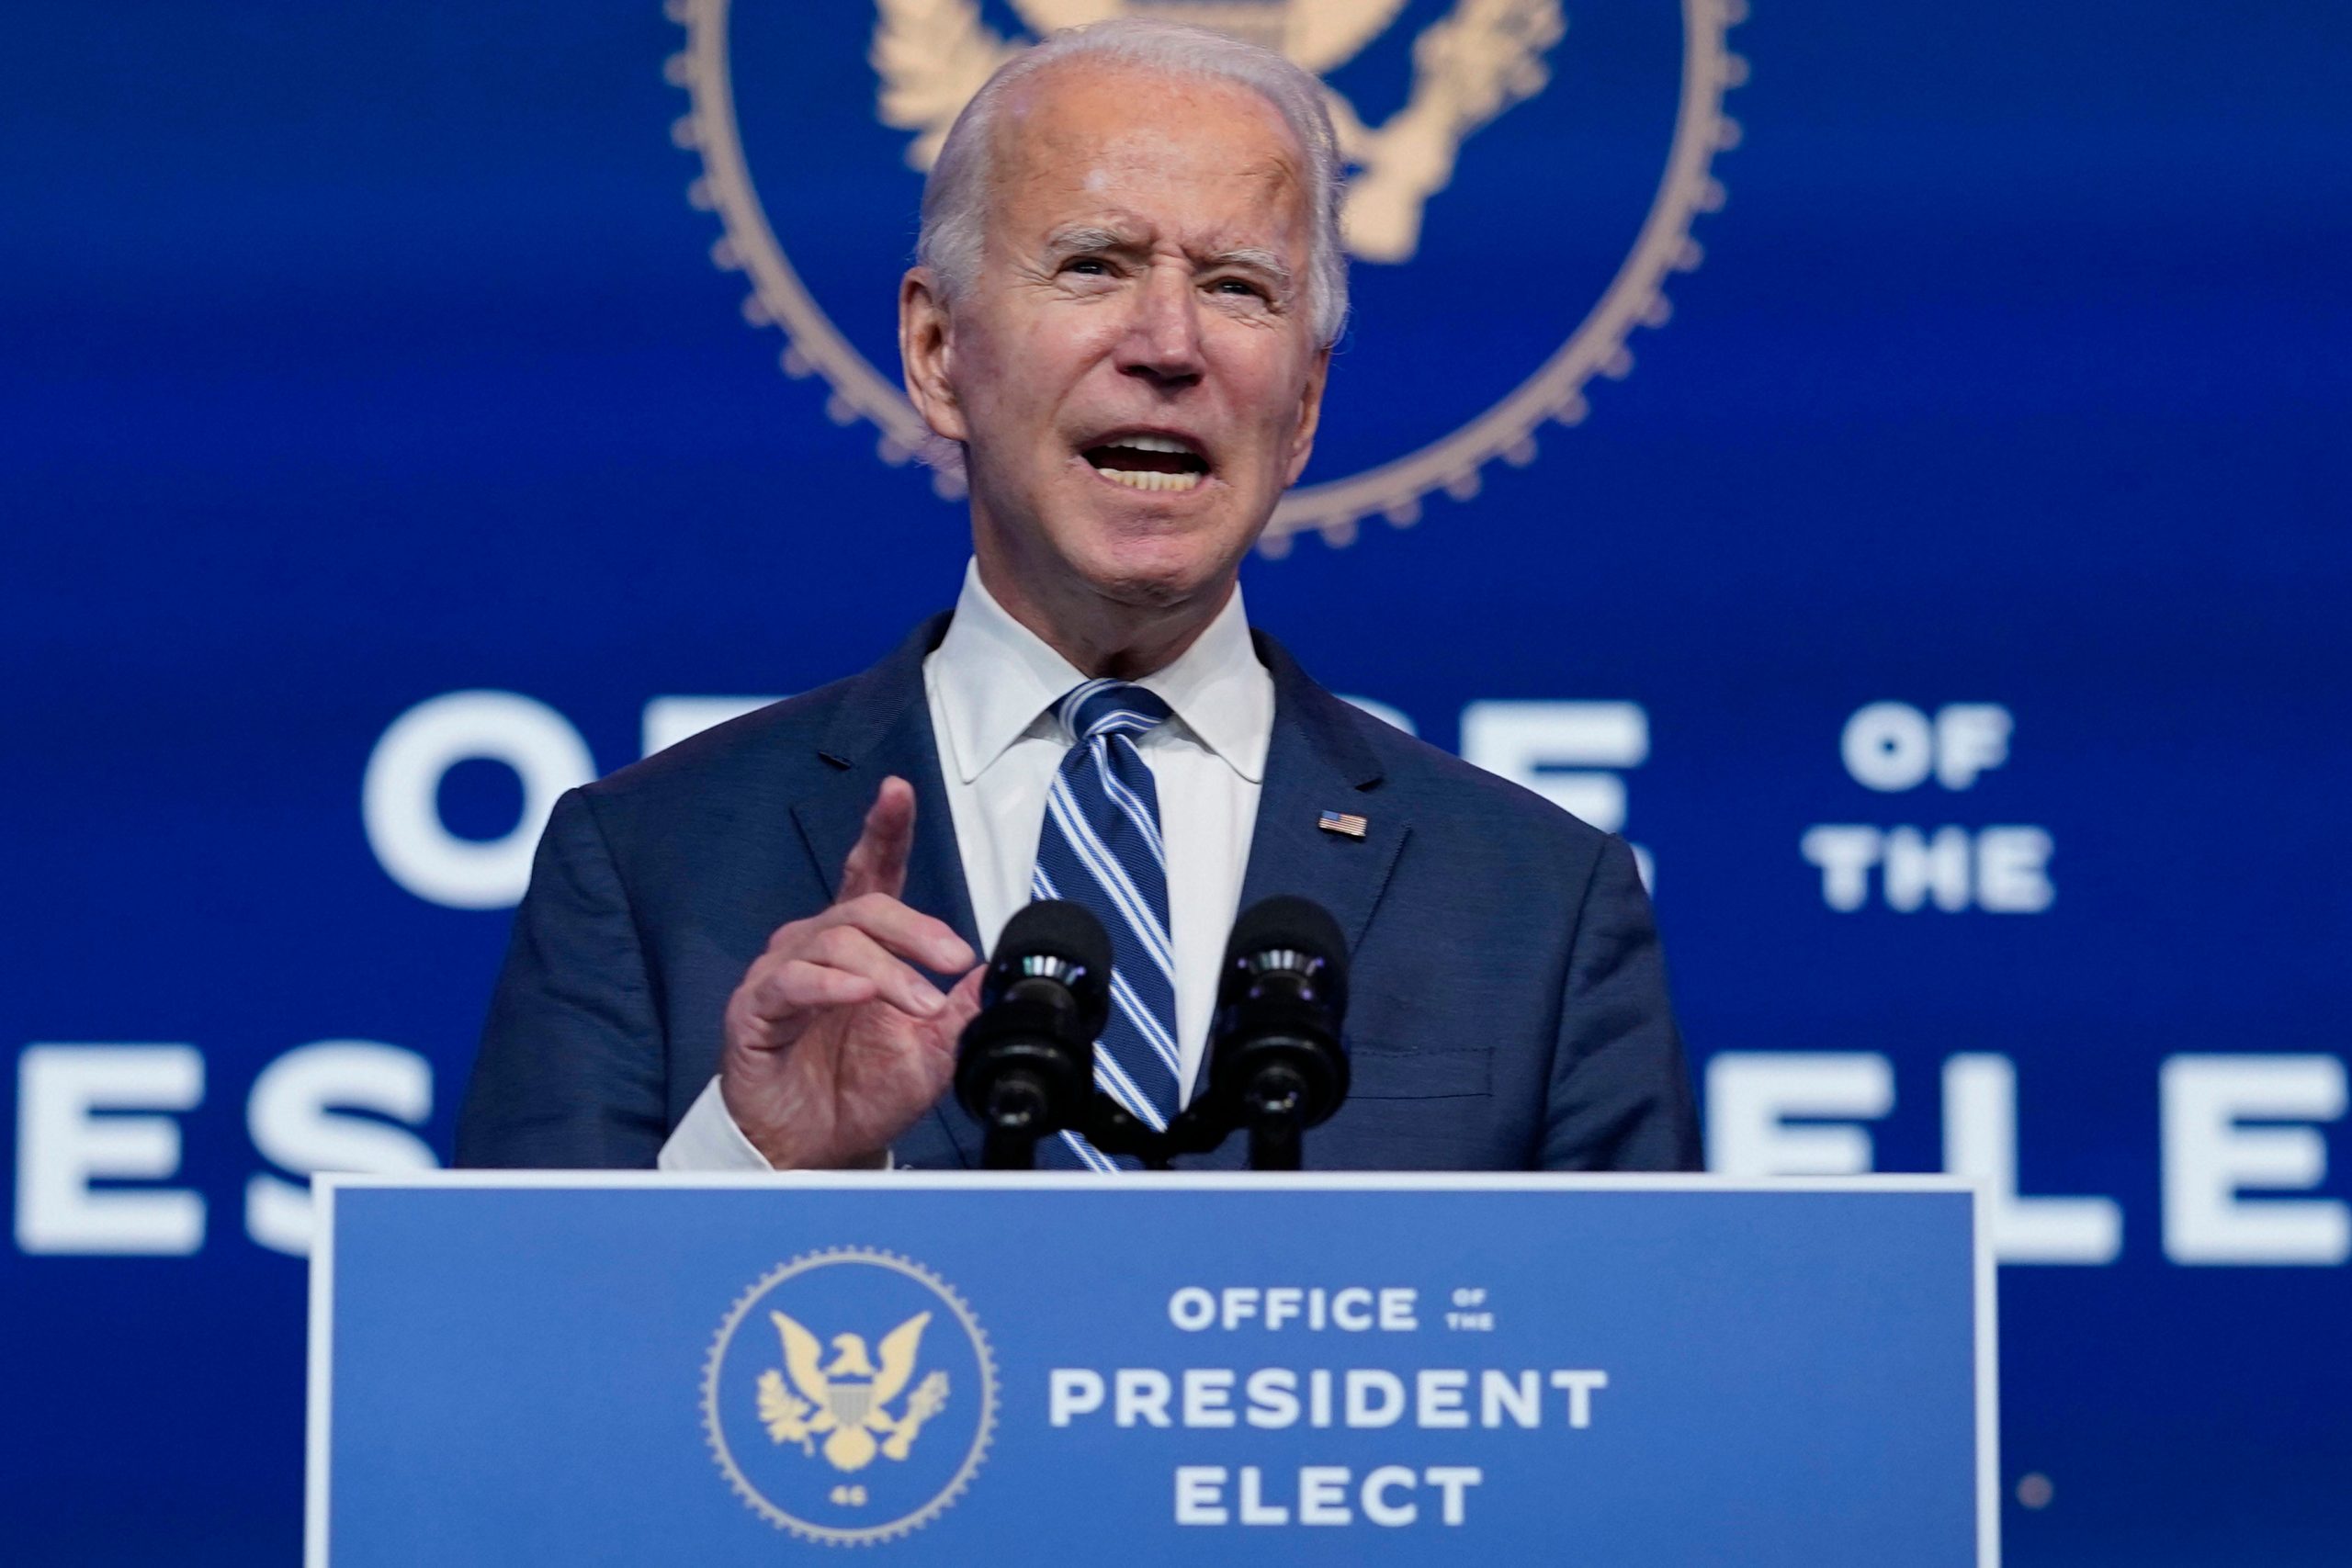 Our moment to write a newer, bolder, compassionate chapter: US President-elect Joe Biden